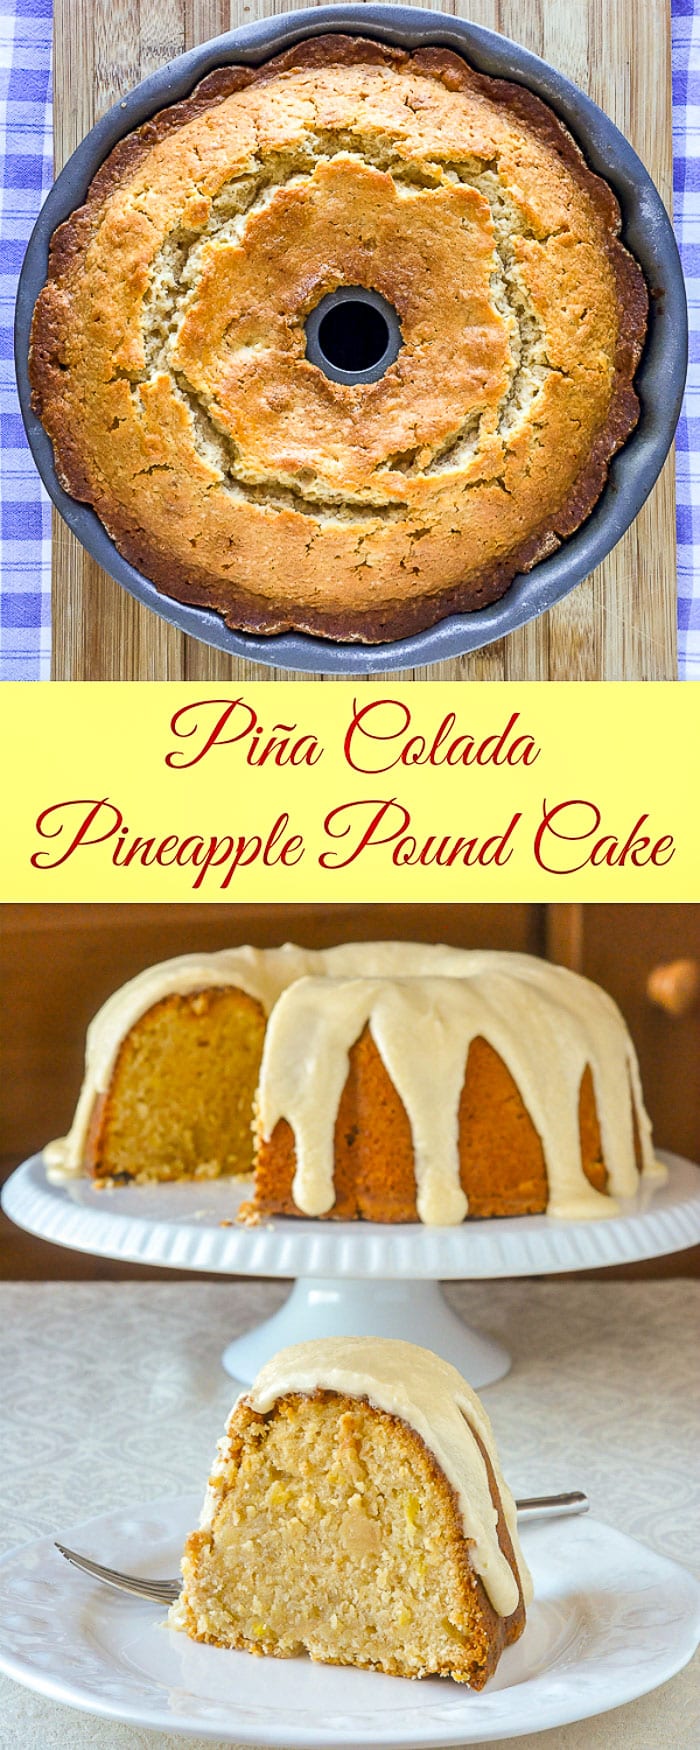 Pina Colada Pineapple Pound Cake photo copllage with title text for Pinterest